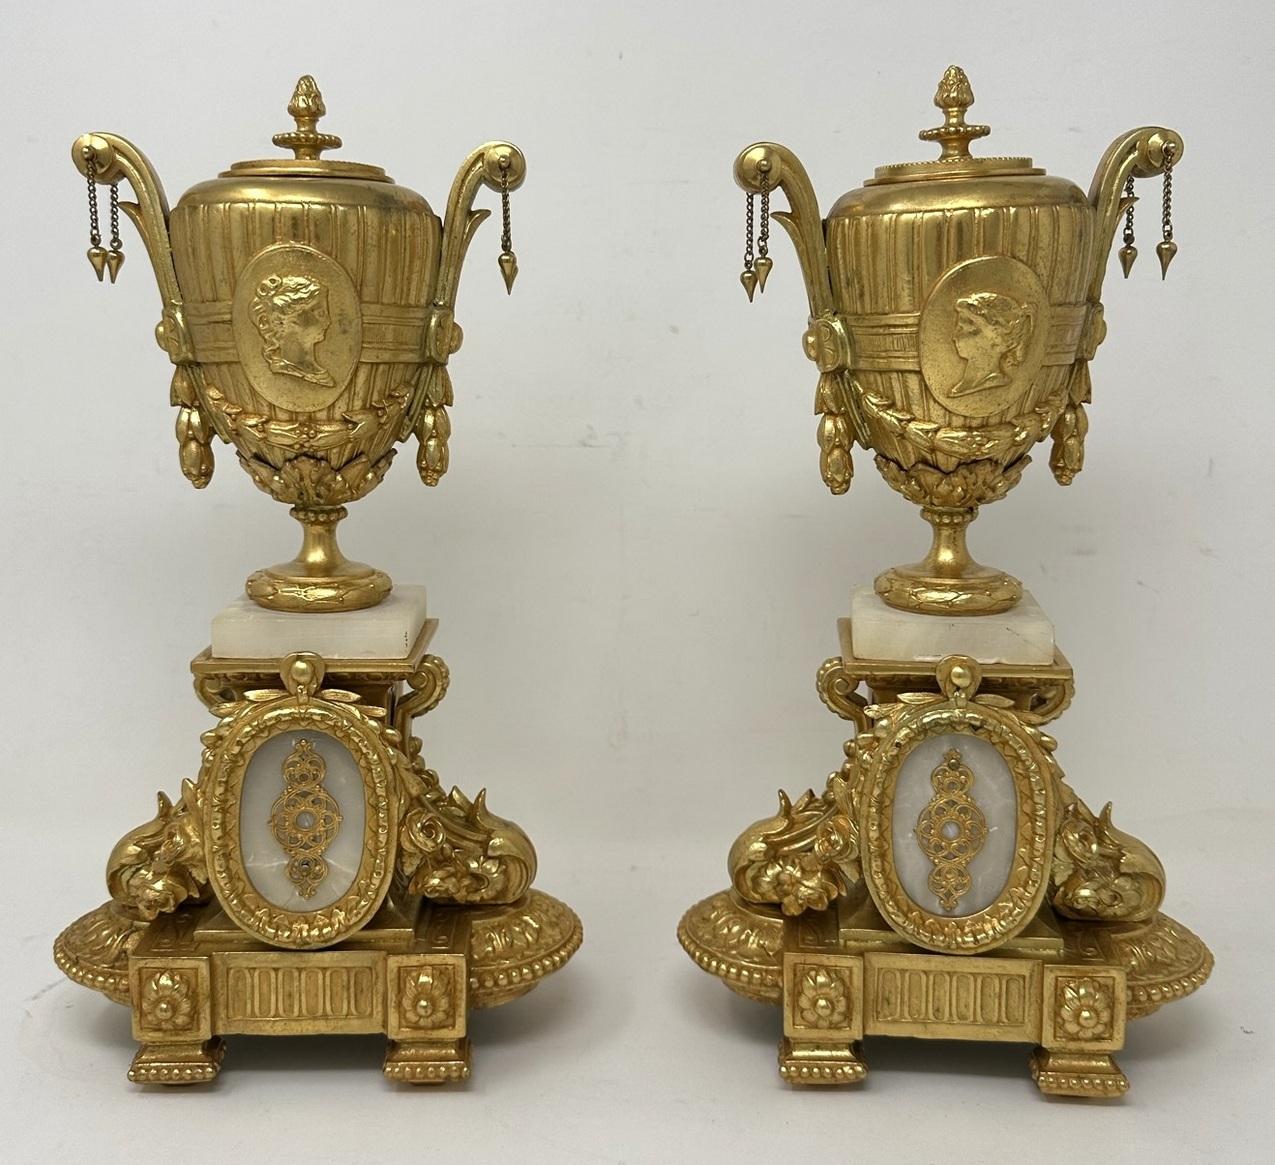 Wonderful Pair of French Gilt and Alabaster Twin Handle Cassolettes or Single Light Candlesticks of generous proportions. Last half of the Nineteenth Century. 

The unusual decorative handles with hanging chains on a traditional urn with a central